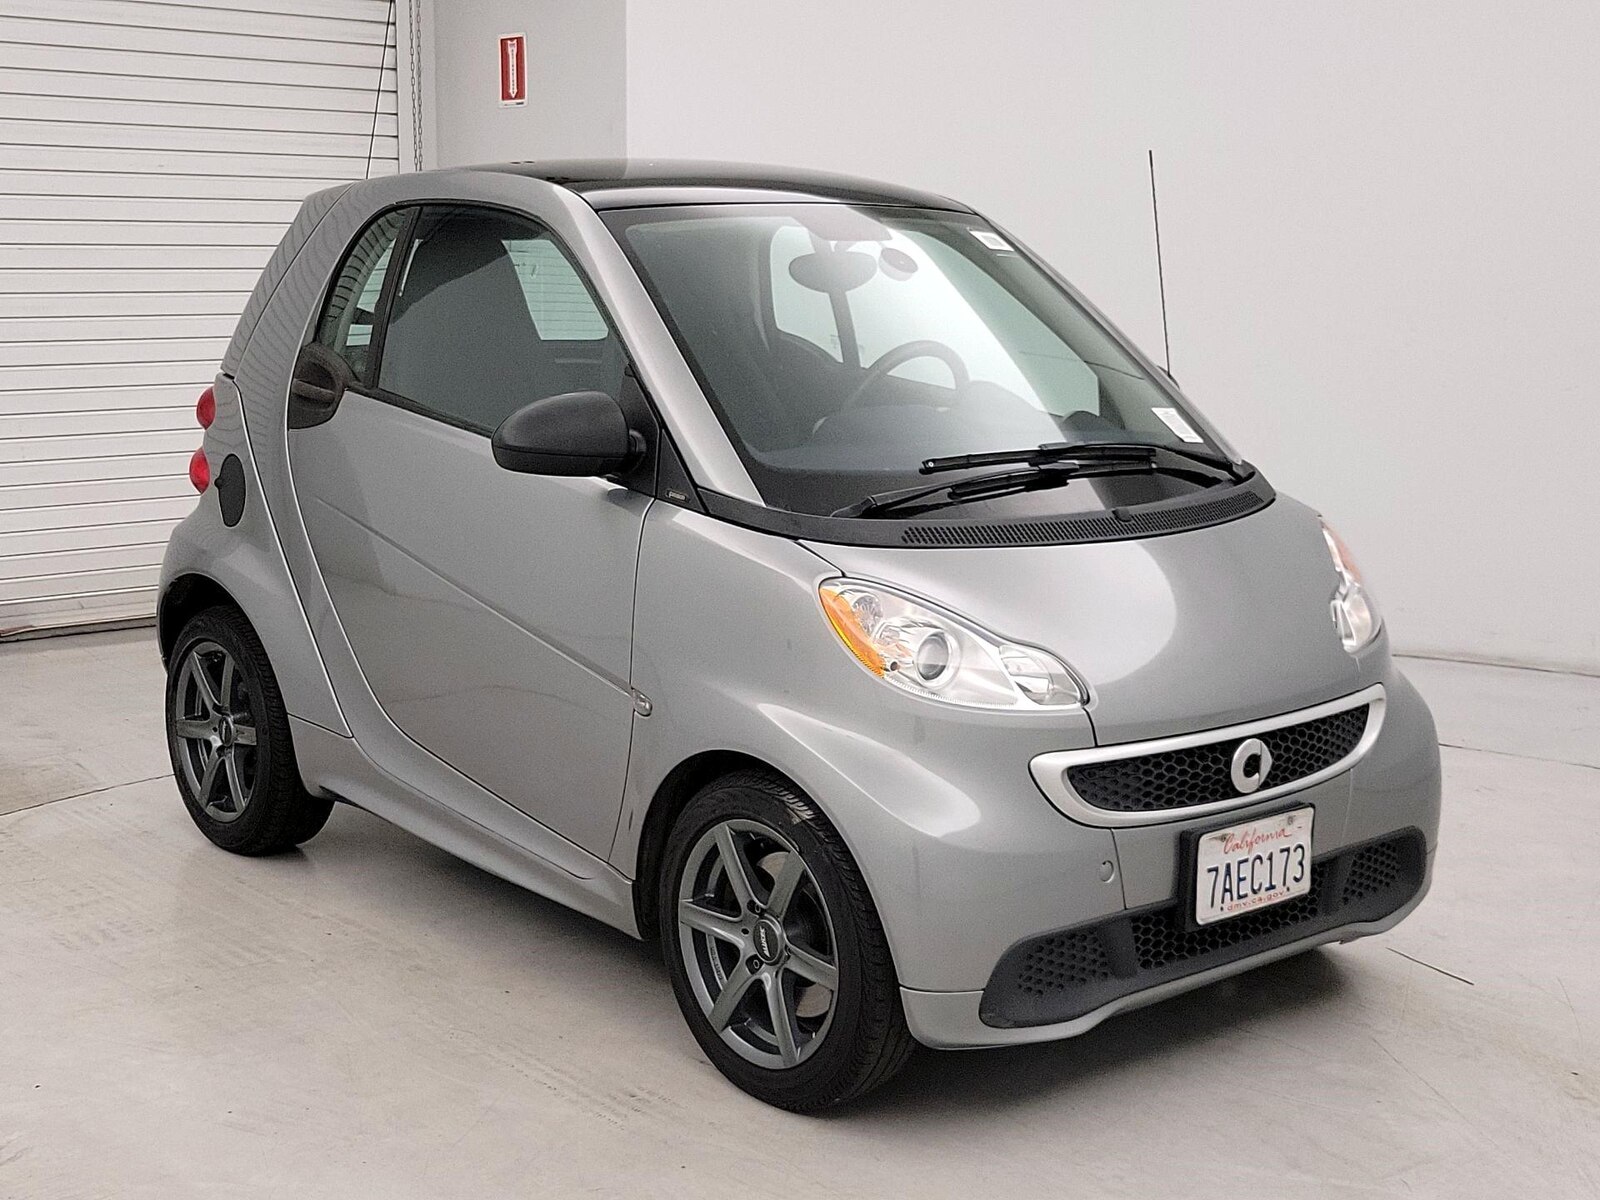 Used 2013 smart fortwo passion with VIN WMEEJ3BAXDK667812 for sale in Spokane Valley, WA